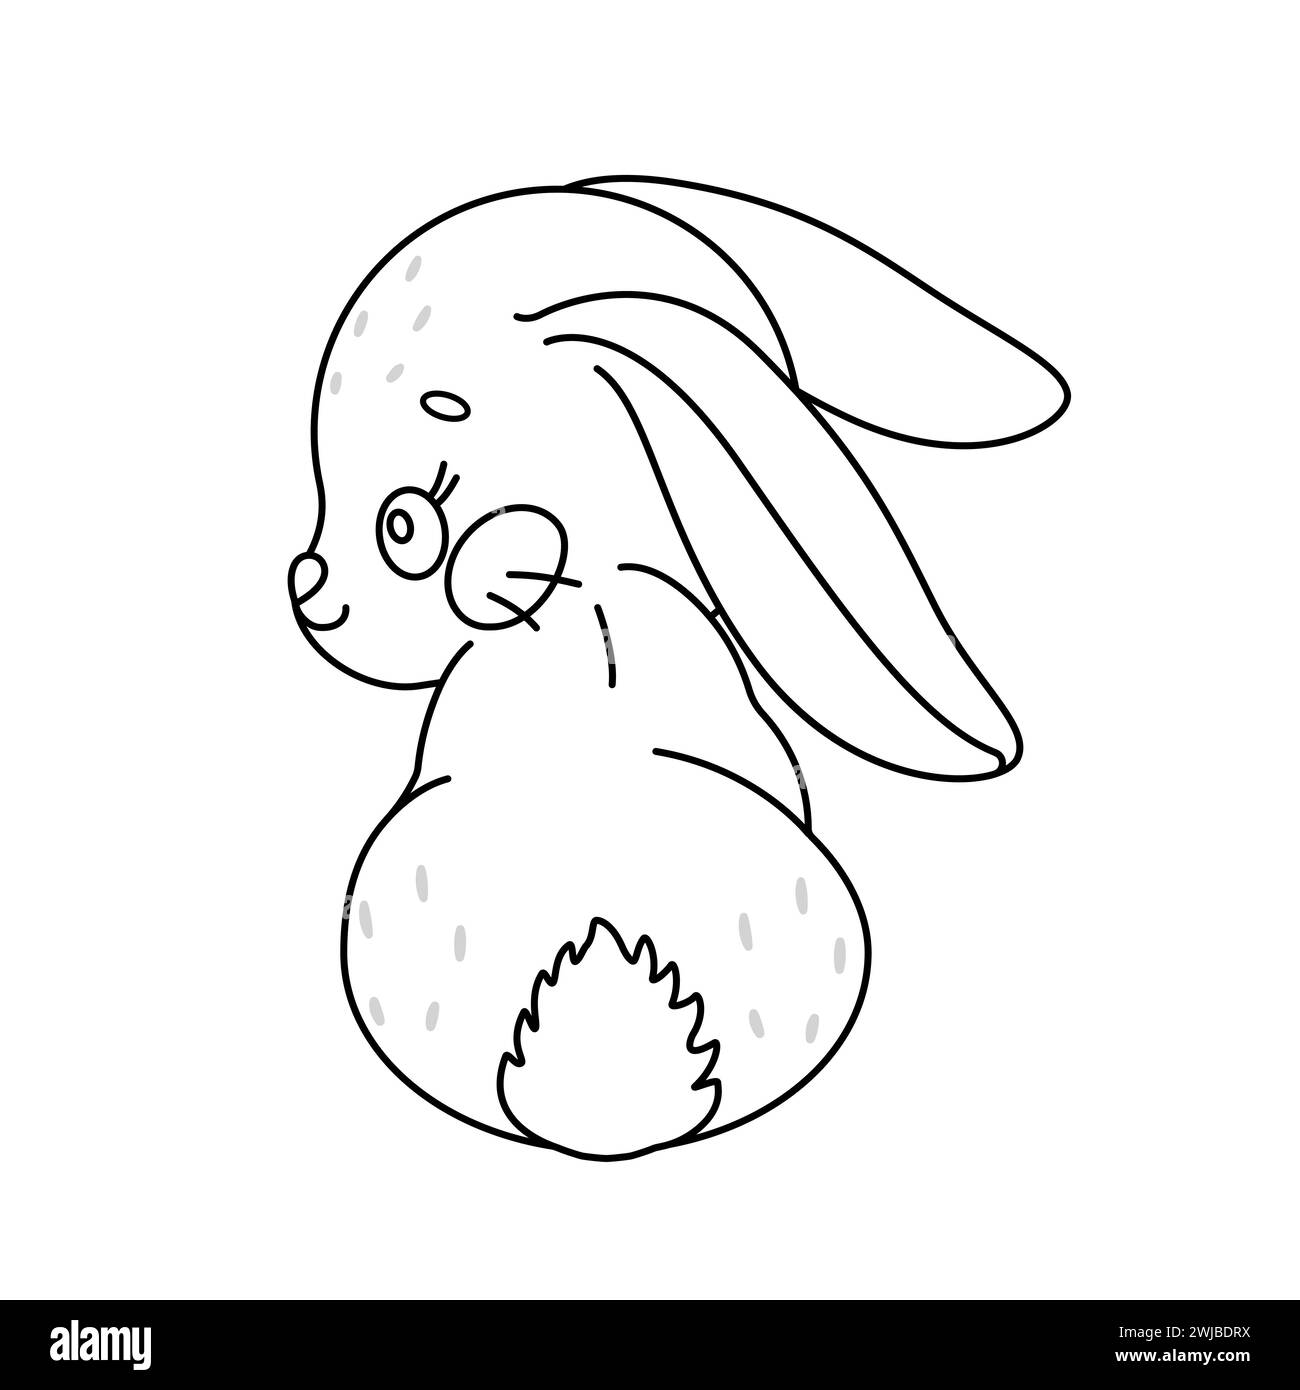 Cartoon easter Bunny. Cute rabbit. Kawaii bunny Sitting, rear view. Coloring page for kids and adults. Vector illustration. Stock Vector